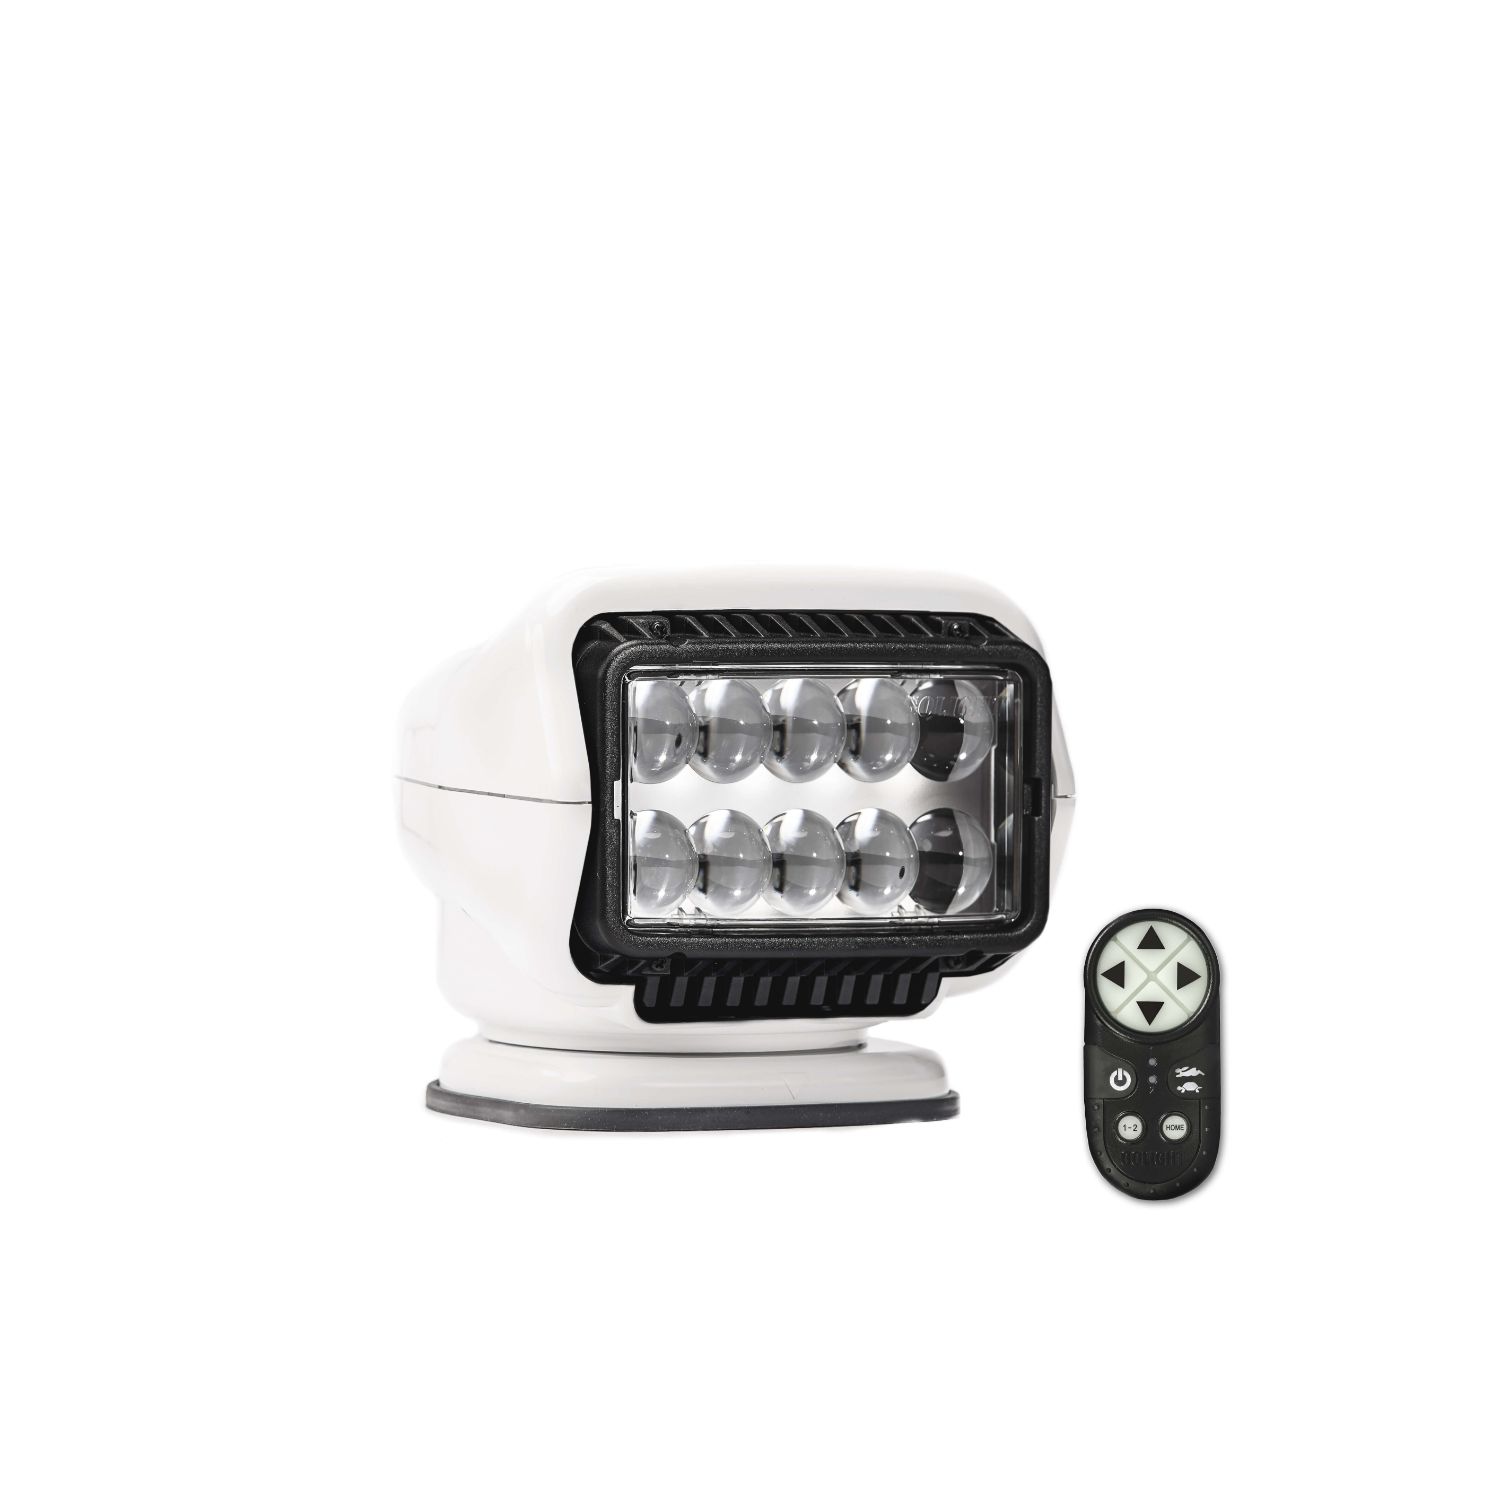 STRYKER LED PERMANENT MOUNT WIRELESS HANDHELD REMOTE-WHITE